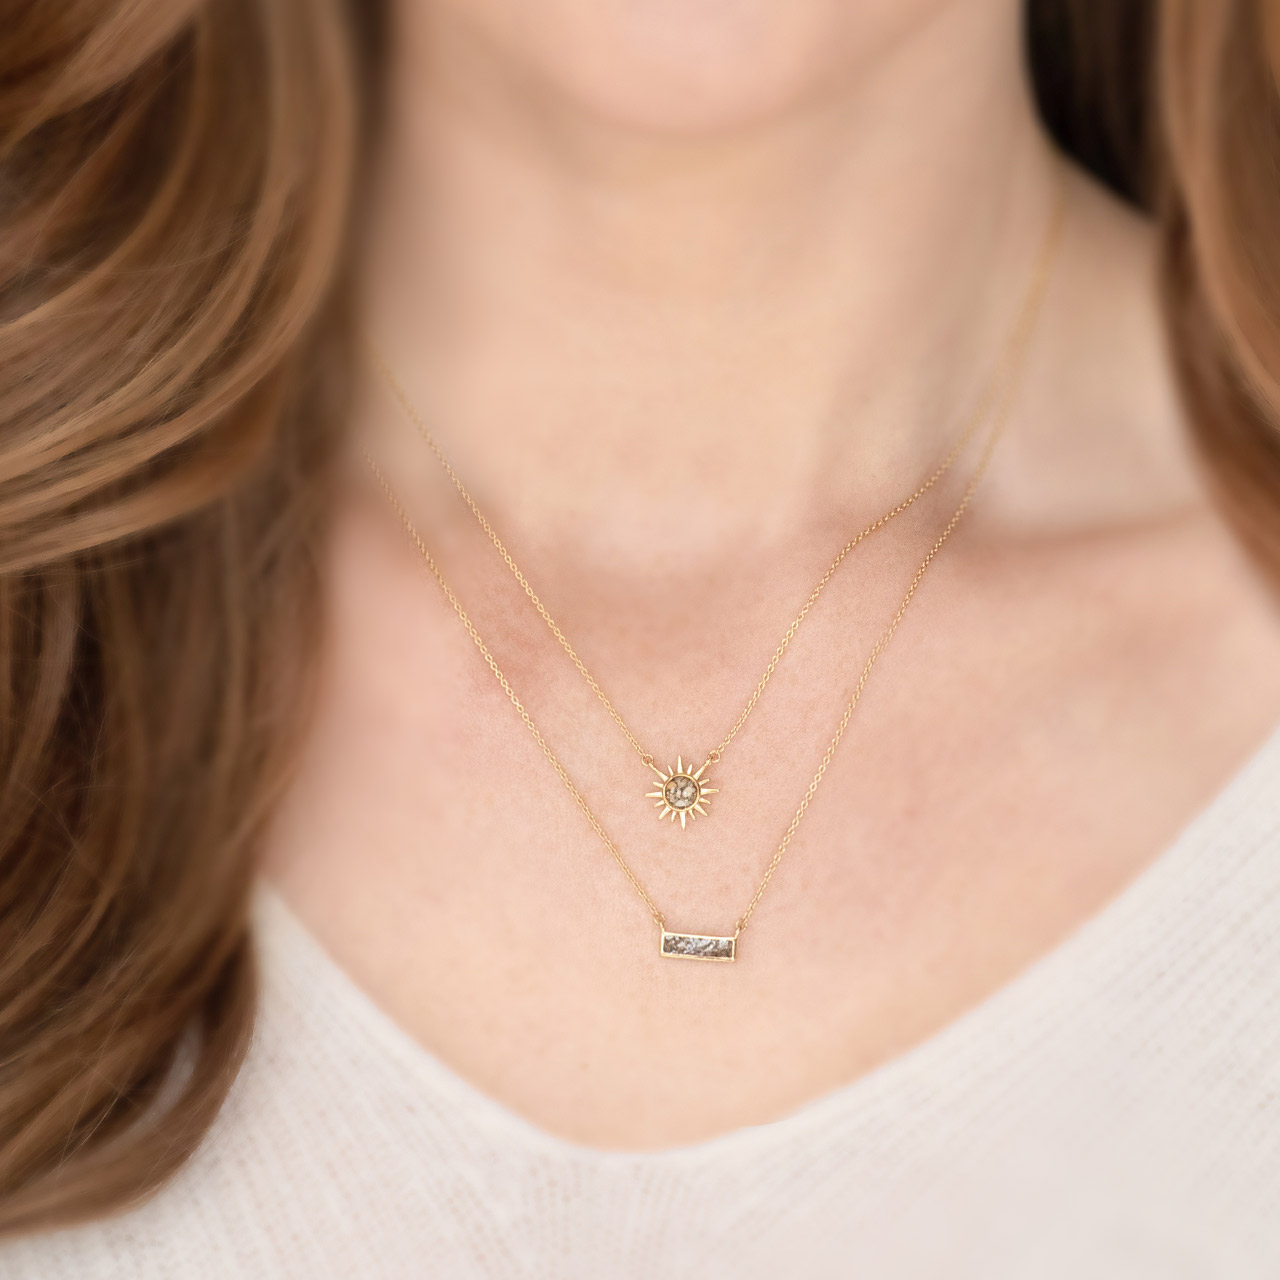 Gift for Mom, Two Initial Necklaces, Gift for Sister, Layered Necklace Set, Delicate  Gold Necklace, Personalized Necklace, Tiny Bar Necklace